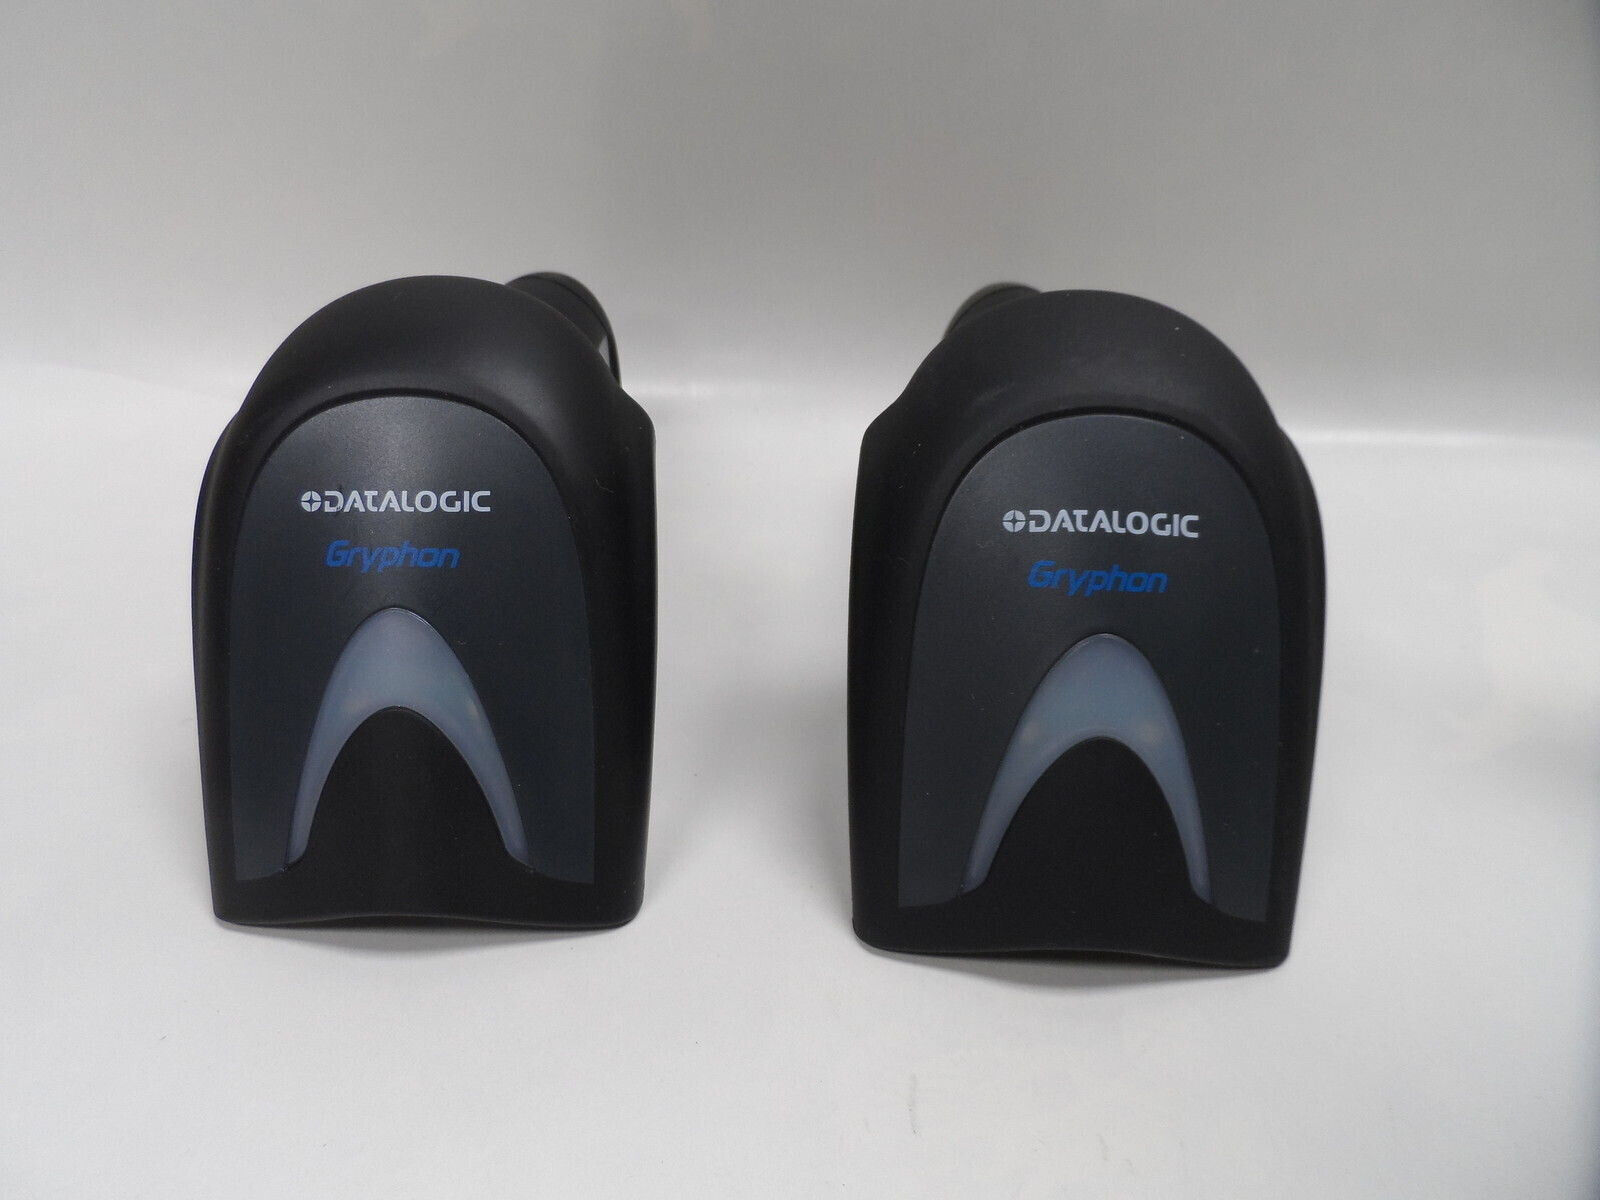 Lot of TWO Datalogic Gryphon GBT4100 -BK Barcode Scanner only with Battery